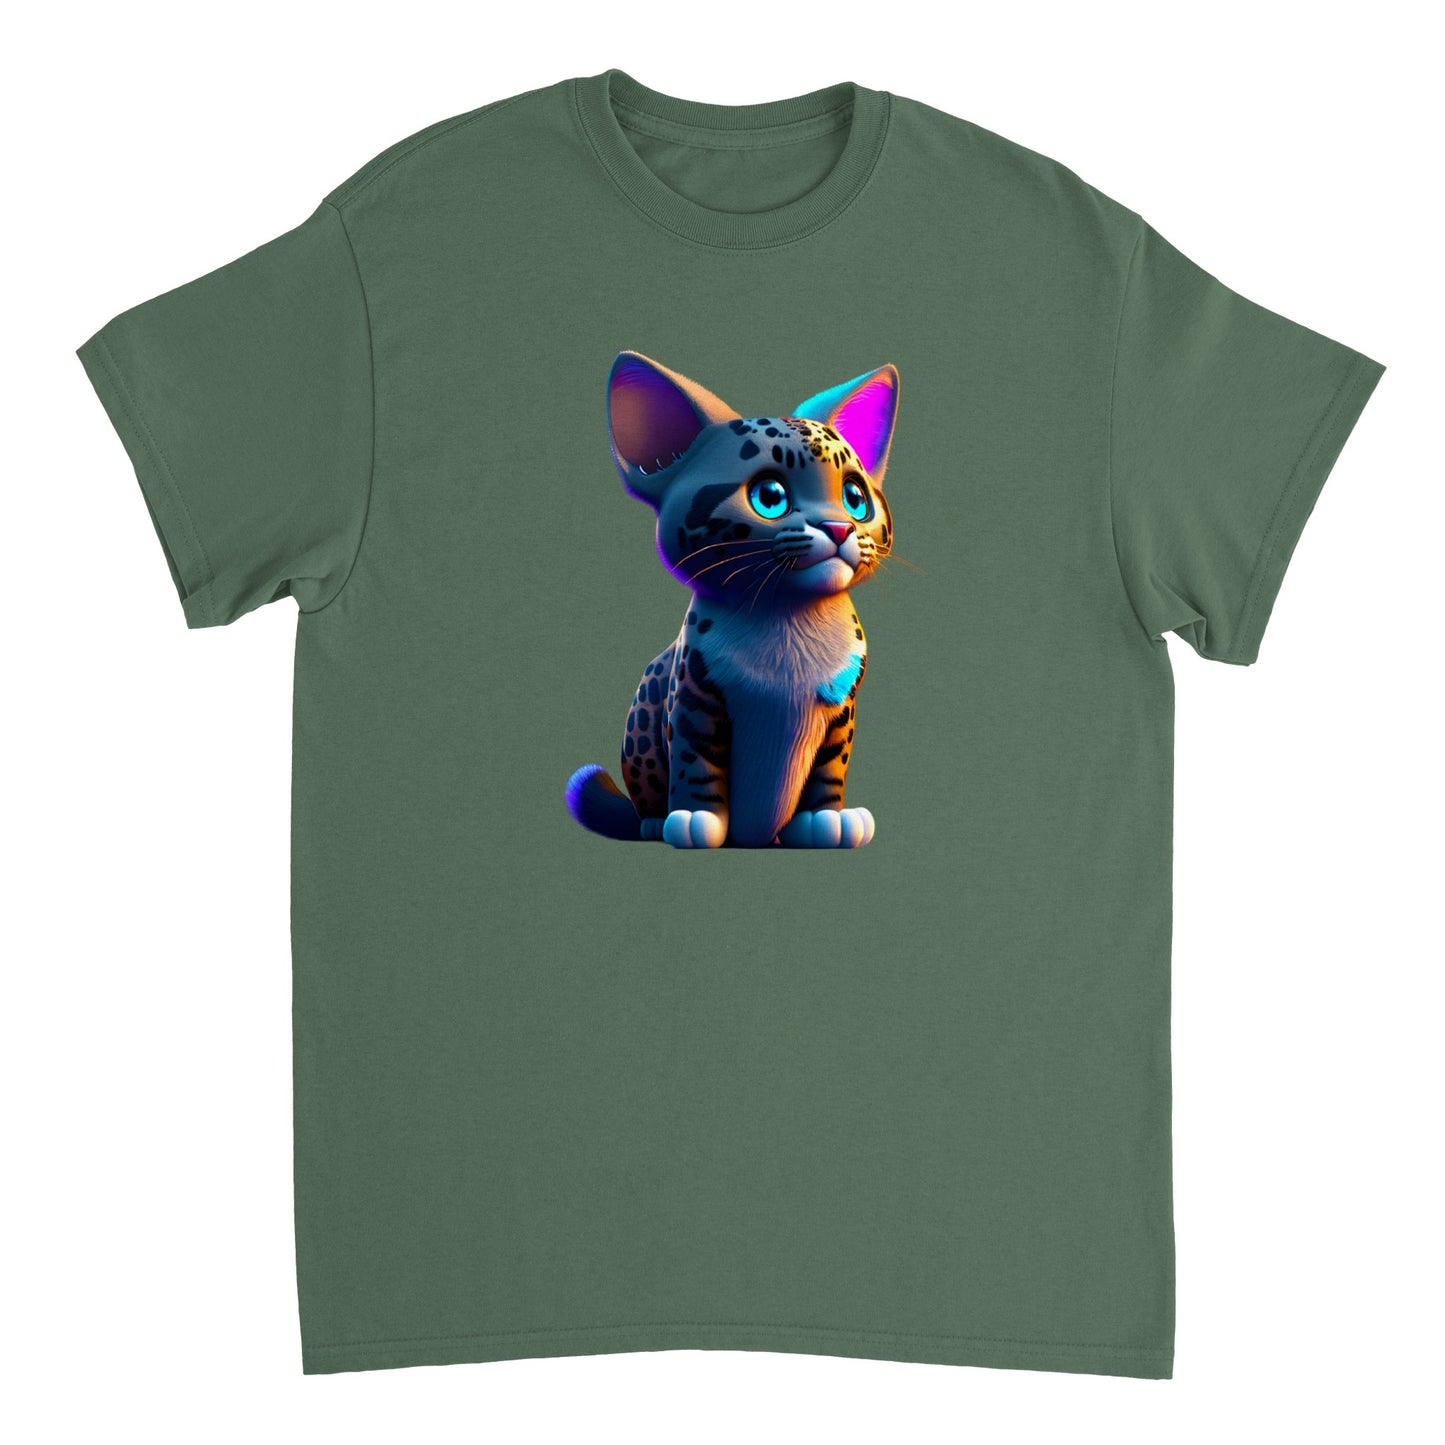 Adorable, Cool, Cute Cats and Kittens Toy - Heavyweight Unisex Crewneck T-shirt 37